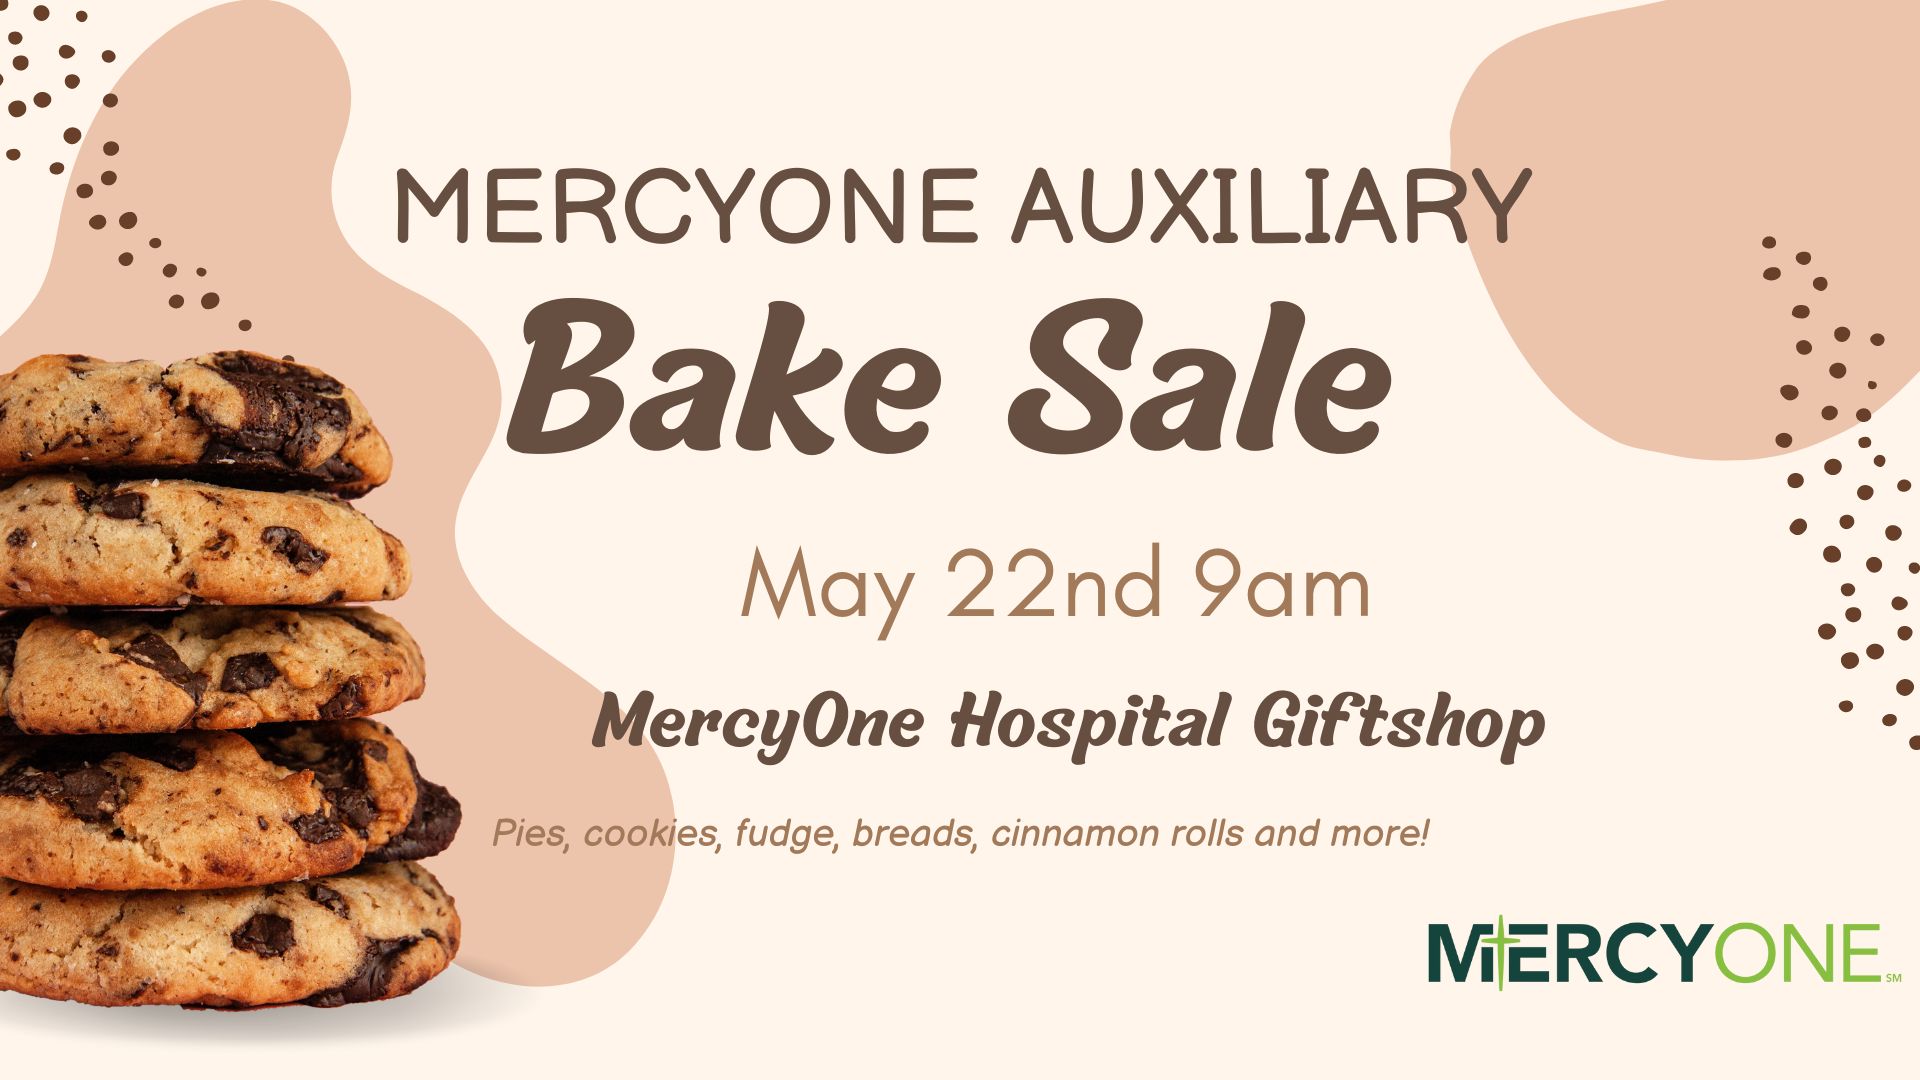 MercyOne Auxiliary Bake Sale May 22nd